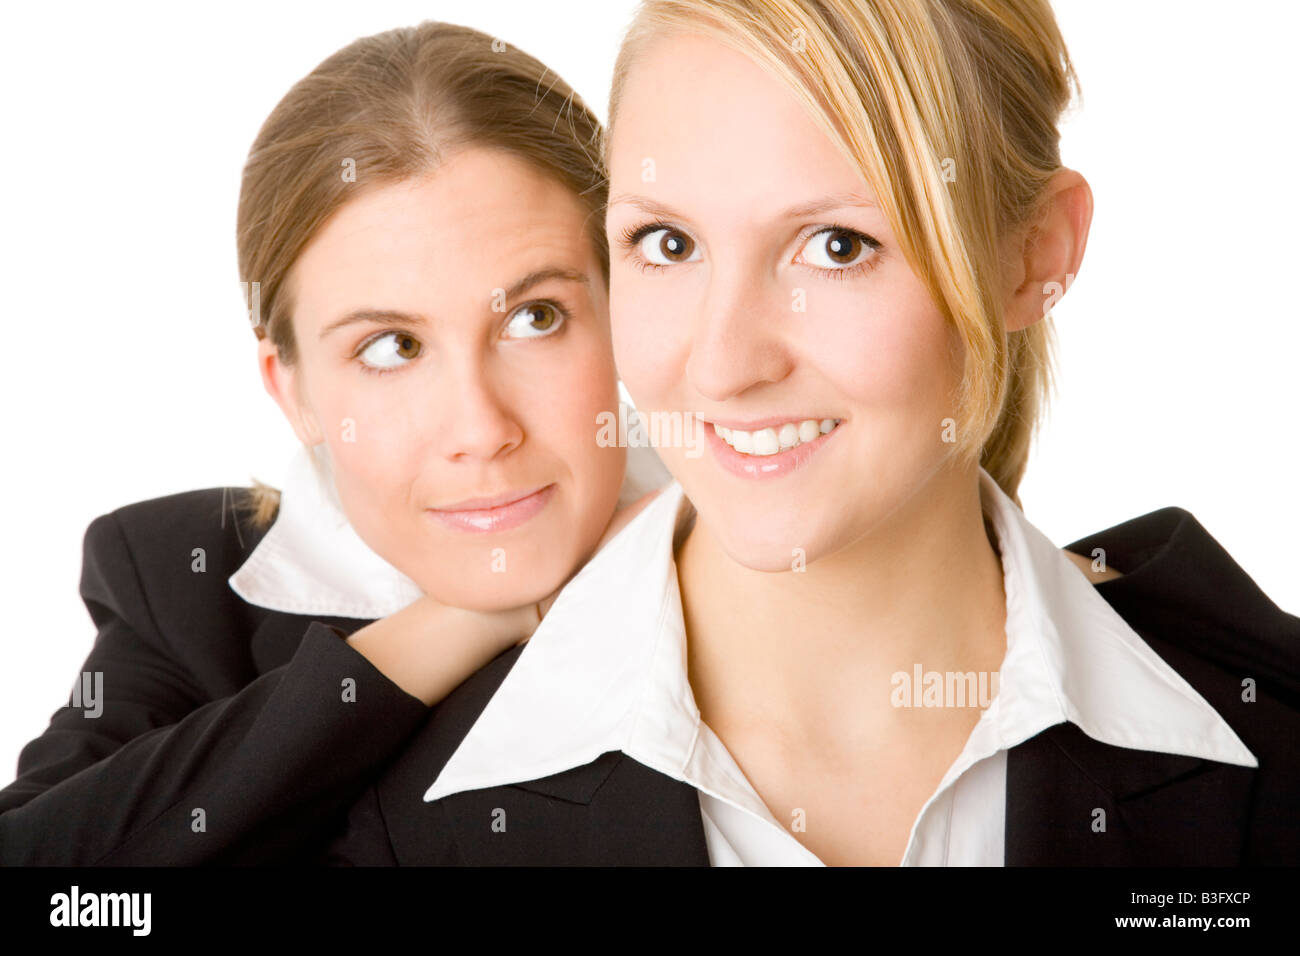 colleagues Stock Photo